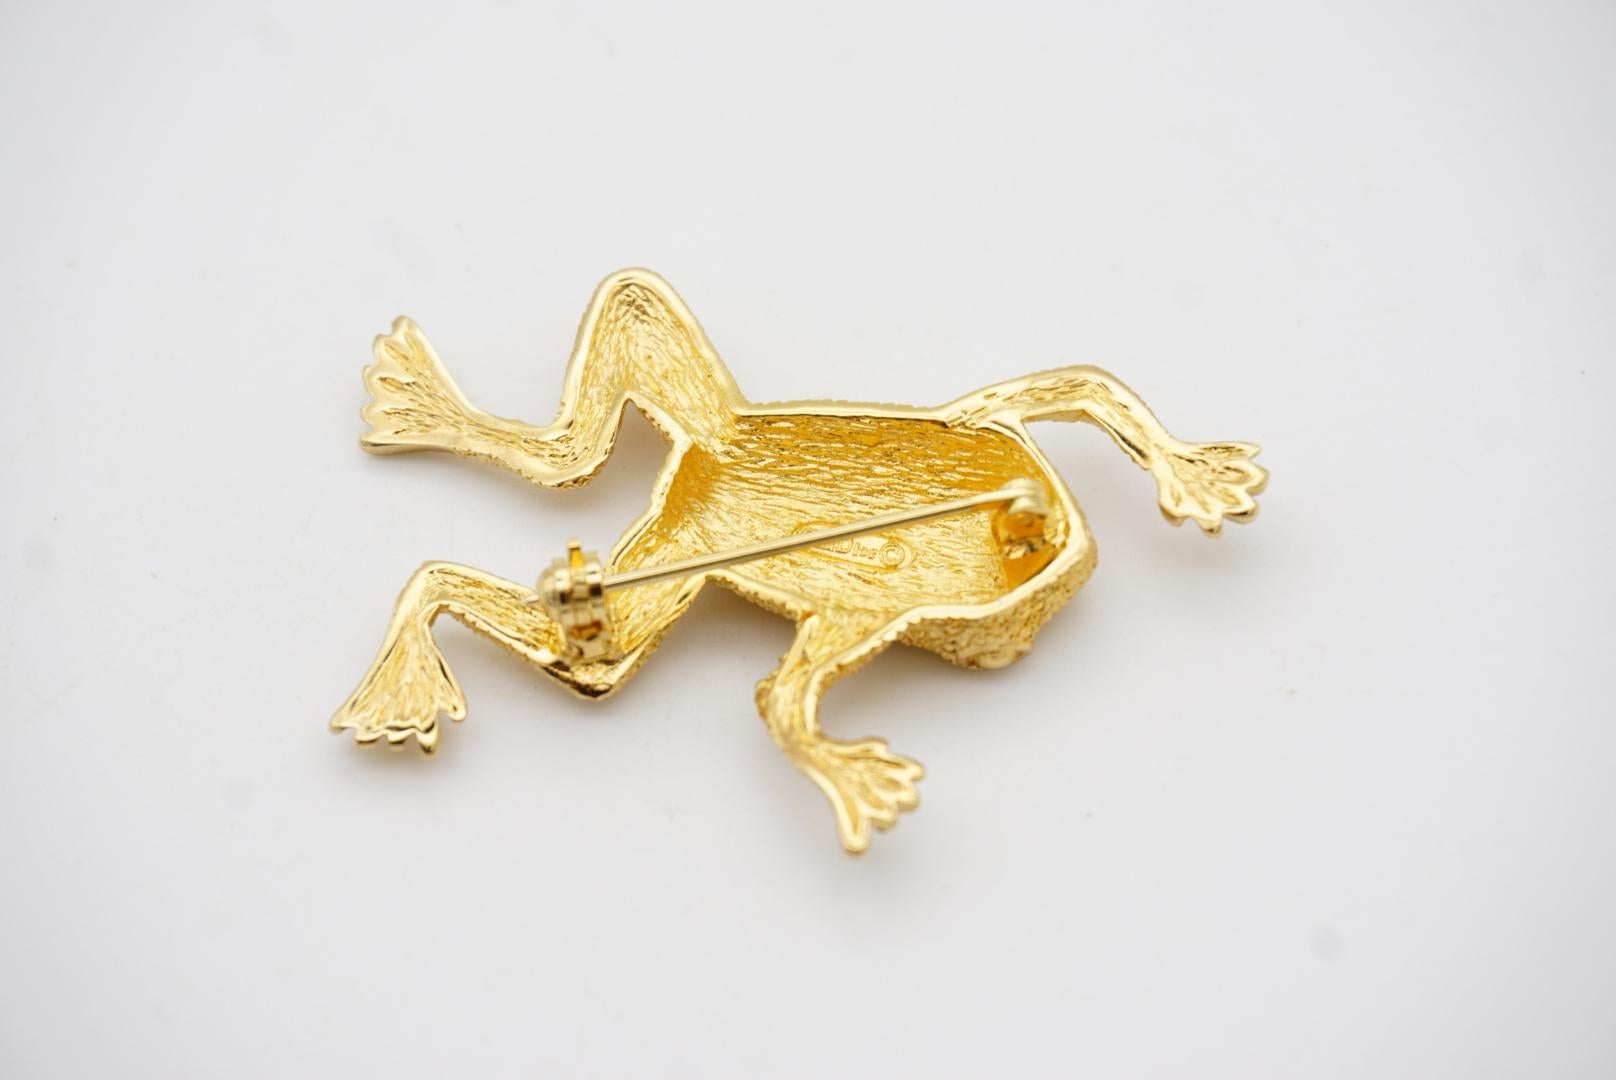 Christian Dior 1980s Vintage Textured Vivid Cute Jumping Swimming Frog Brooch For Sale 4